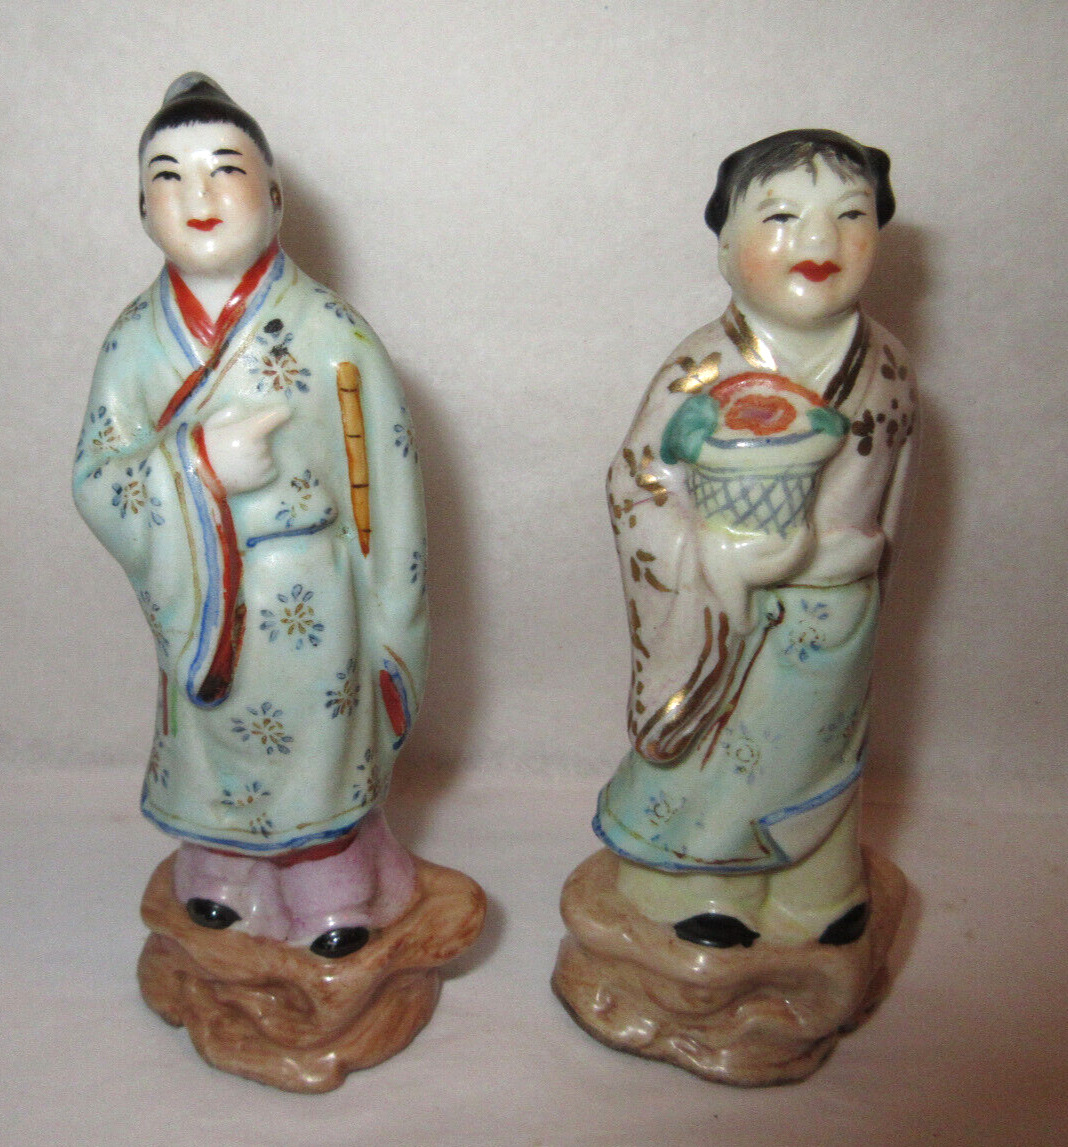 Vintage Chinese Porcelain Immortal Figurines with Seals~Zhang Guo-lao Lan Cai-he